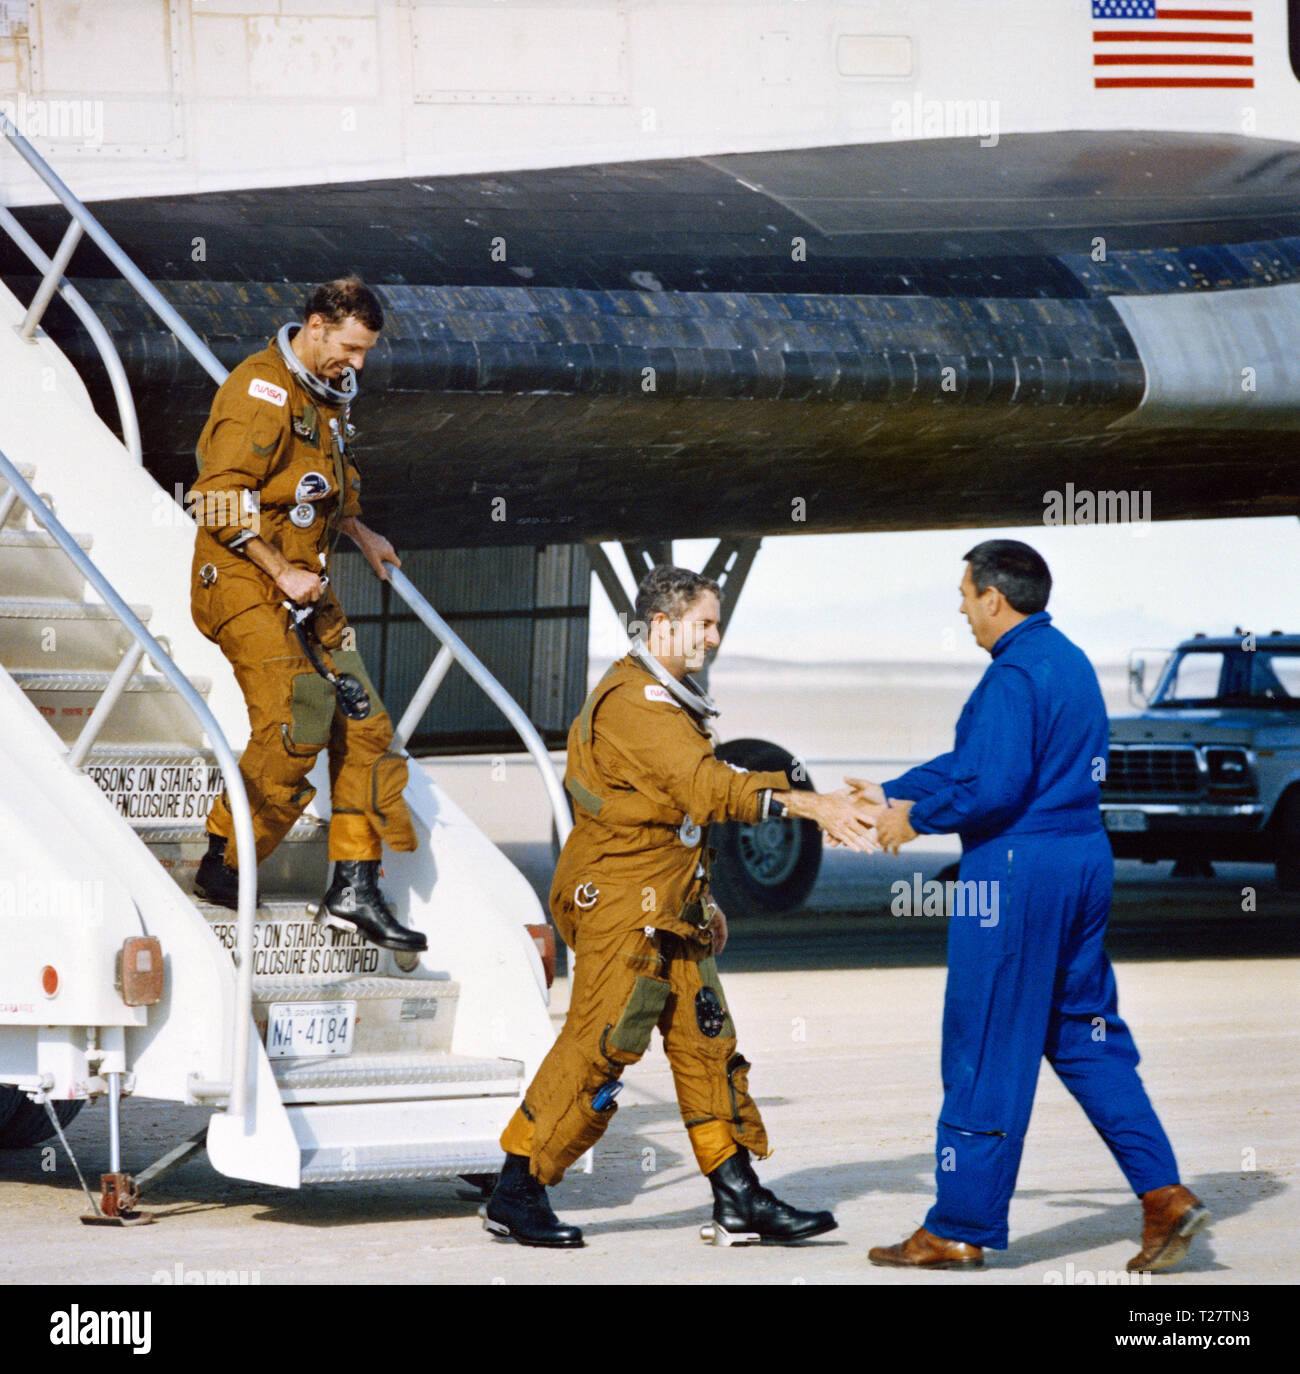 (14 Nov. 1981) --- Astronauts Joe H. Engle, rear, and Richard H. Truly are greeted by George W.S. Abbey, Director of Flight Operations at the Johnson Space Center, as they egress the space shuttle Columbia after spending two days, six hours and 13 minutes on NASA's STS-2 mission. Stock Photo